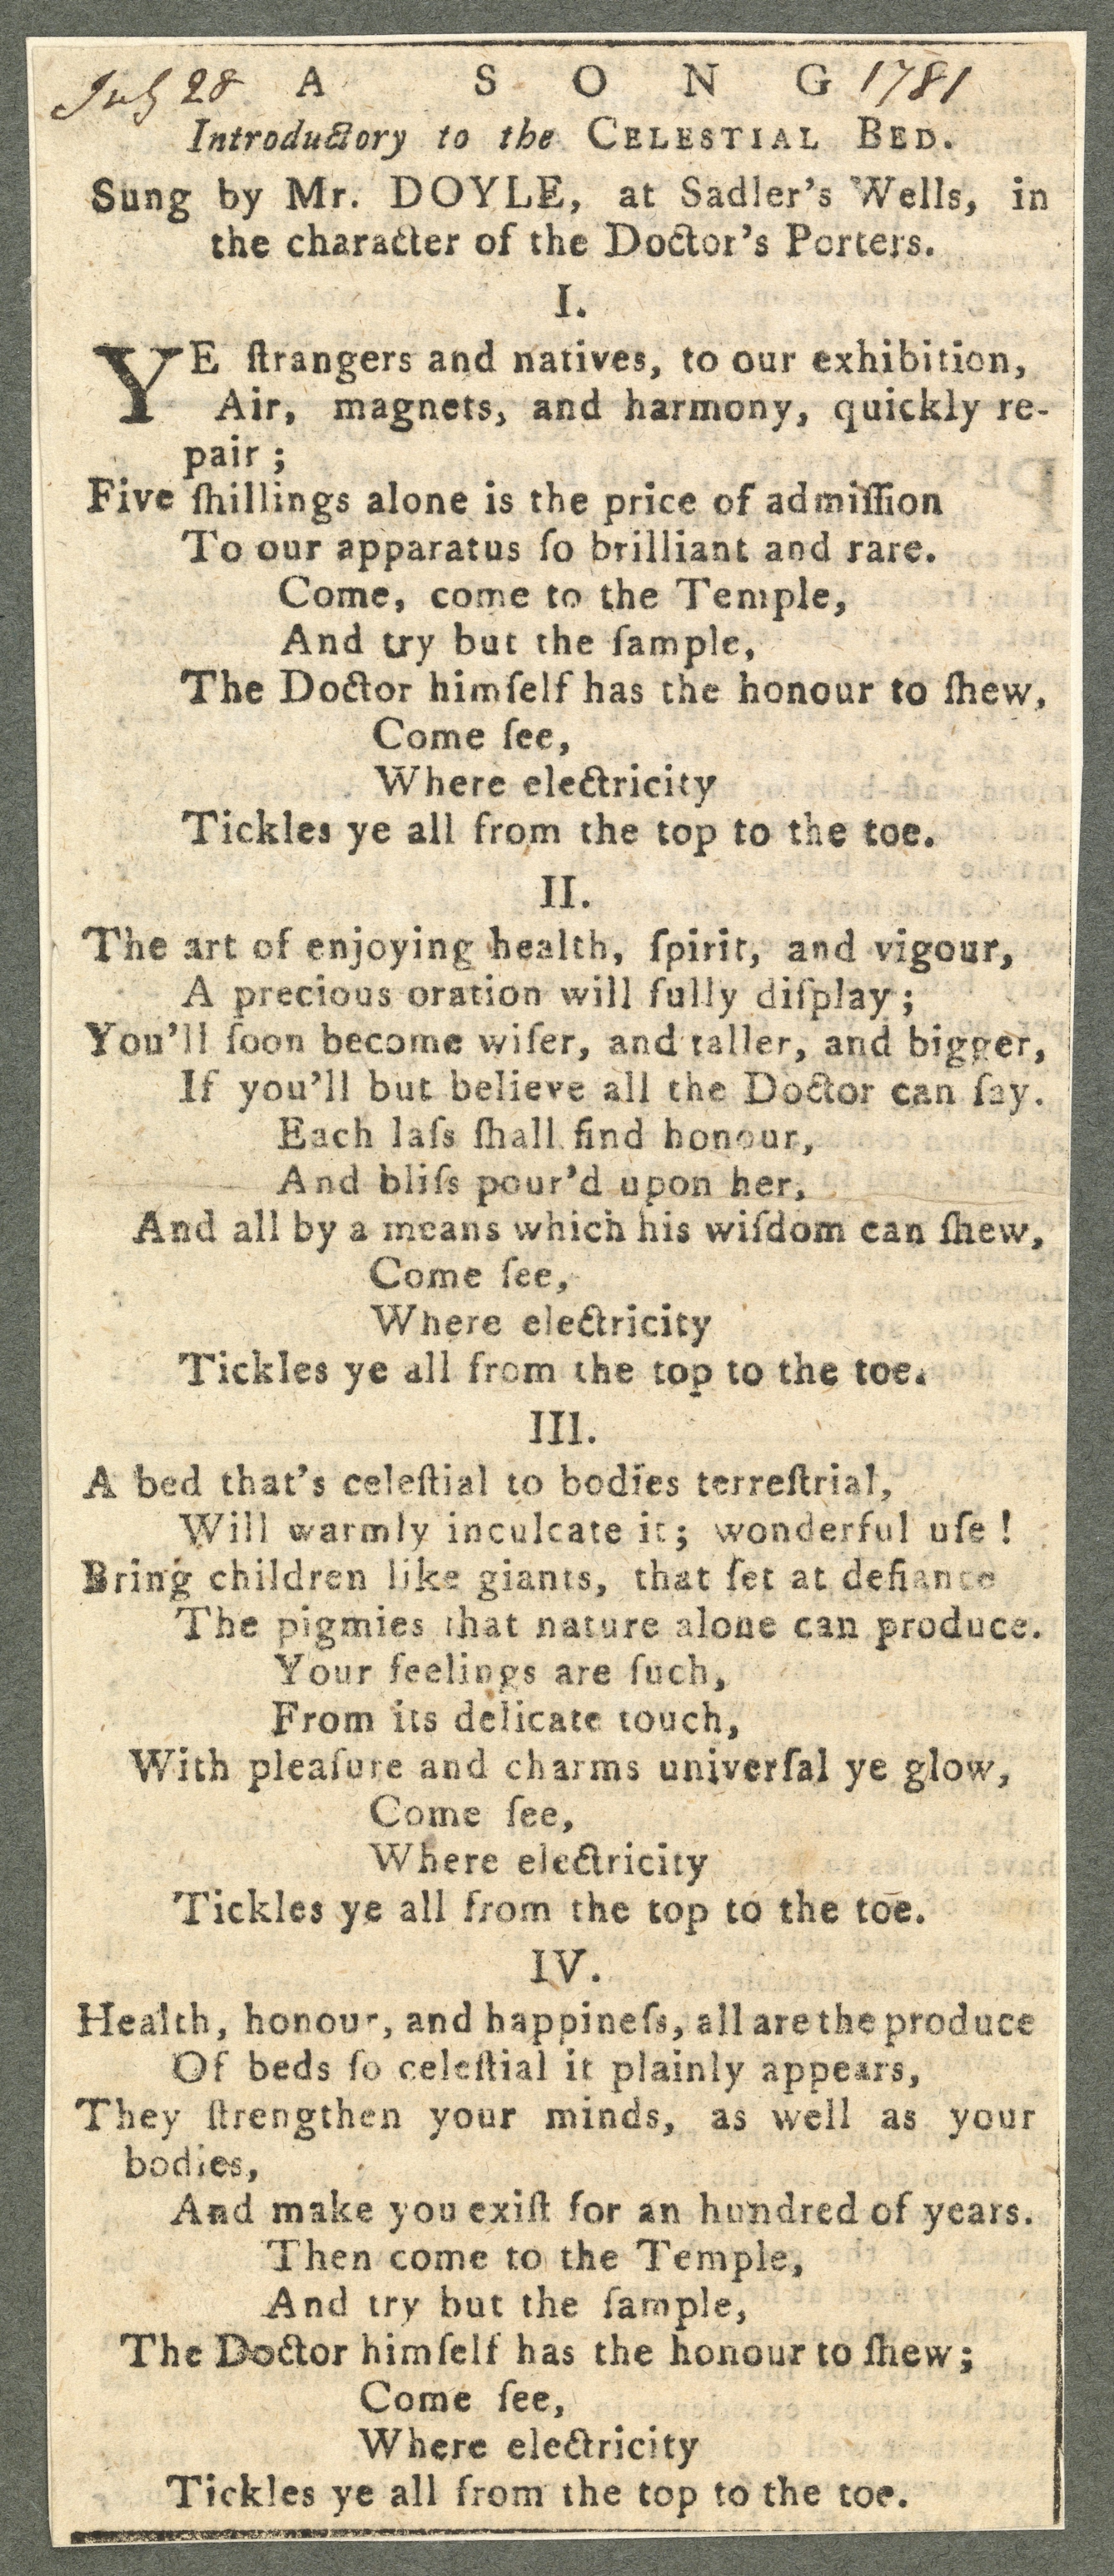 This parodic poem satirizing James Graham was just one of several means by which his perceived quackery was publicly mocked.